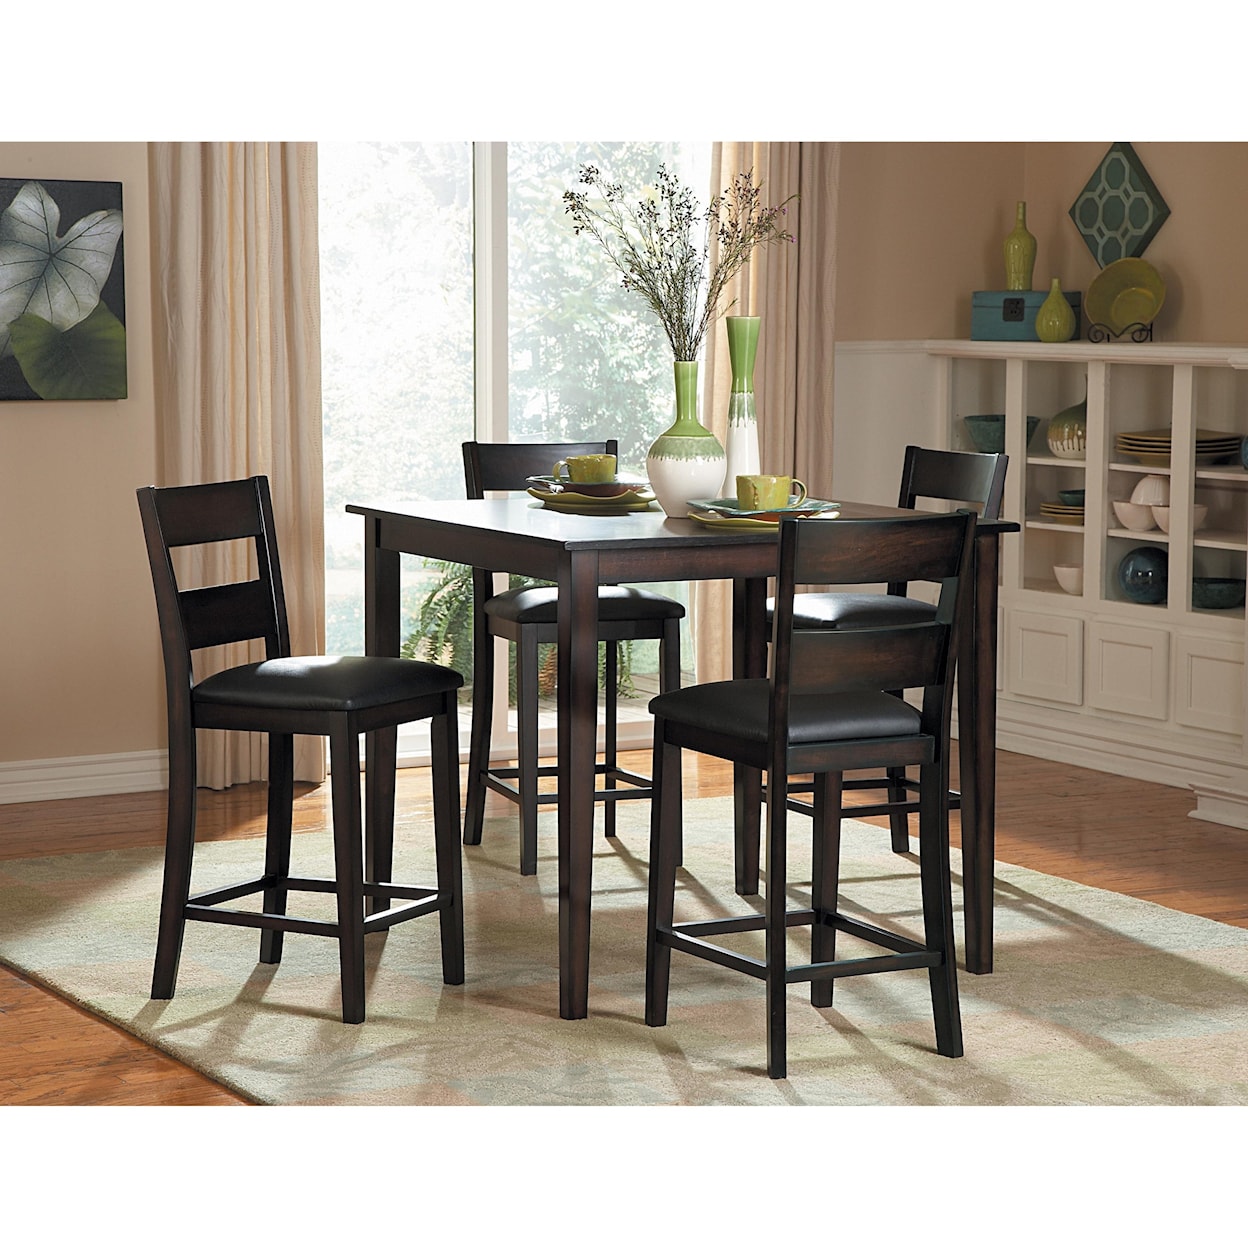 Homelegance Griffin 5Pc Counter Height Table and Chair Set